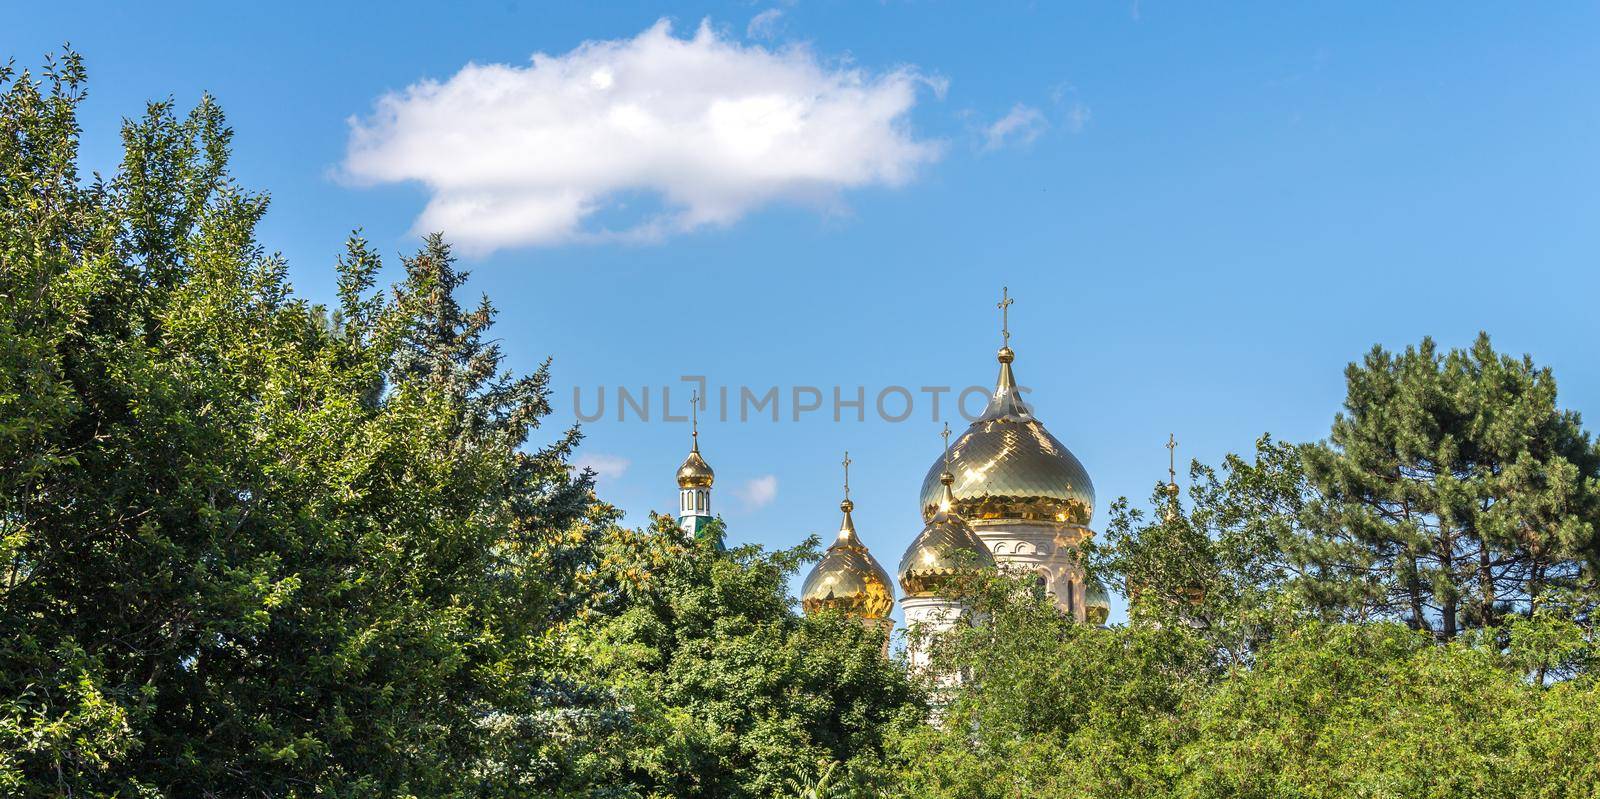 Golden dome of church, view through trees